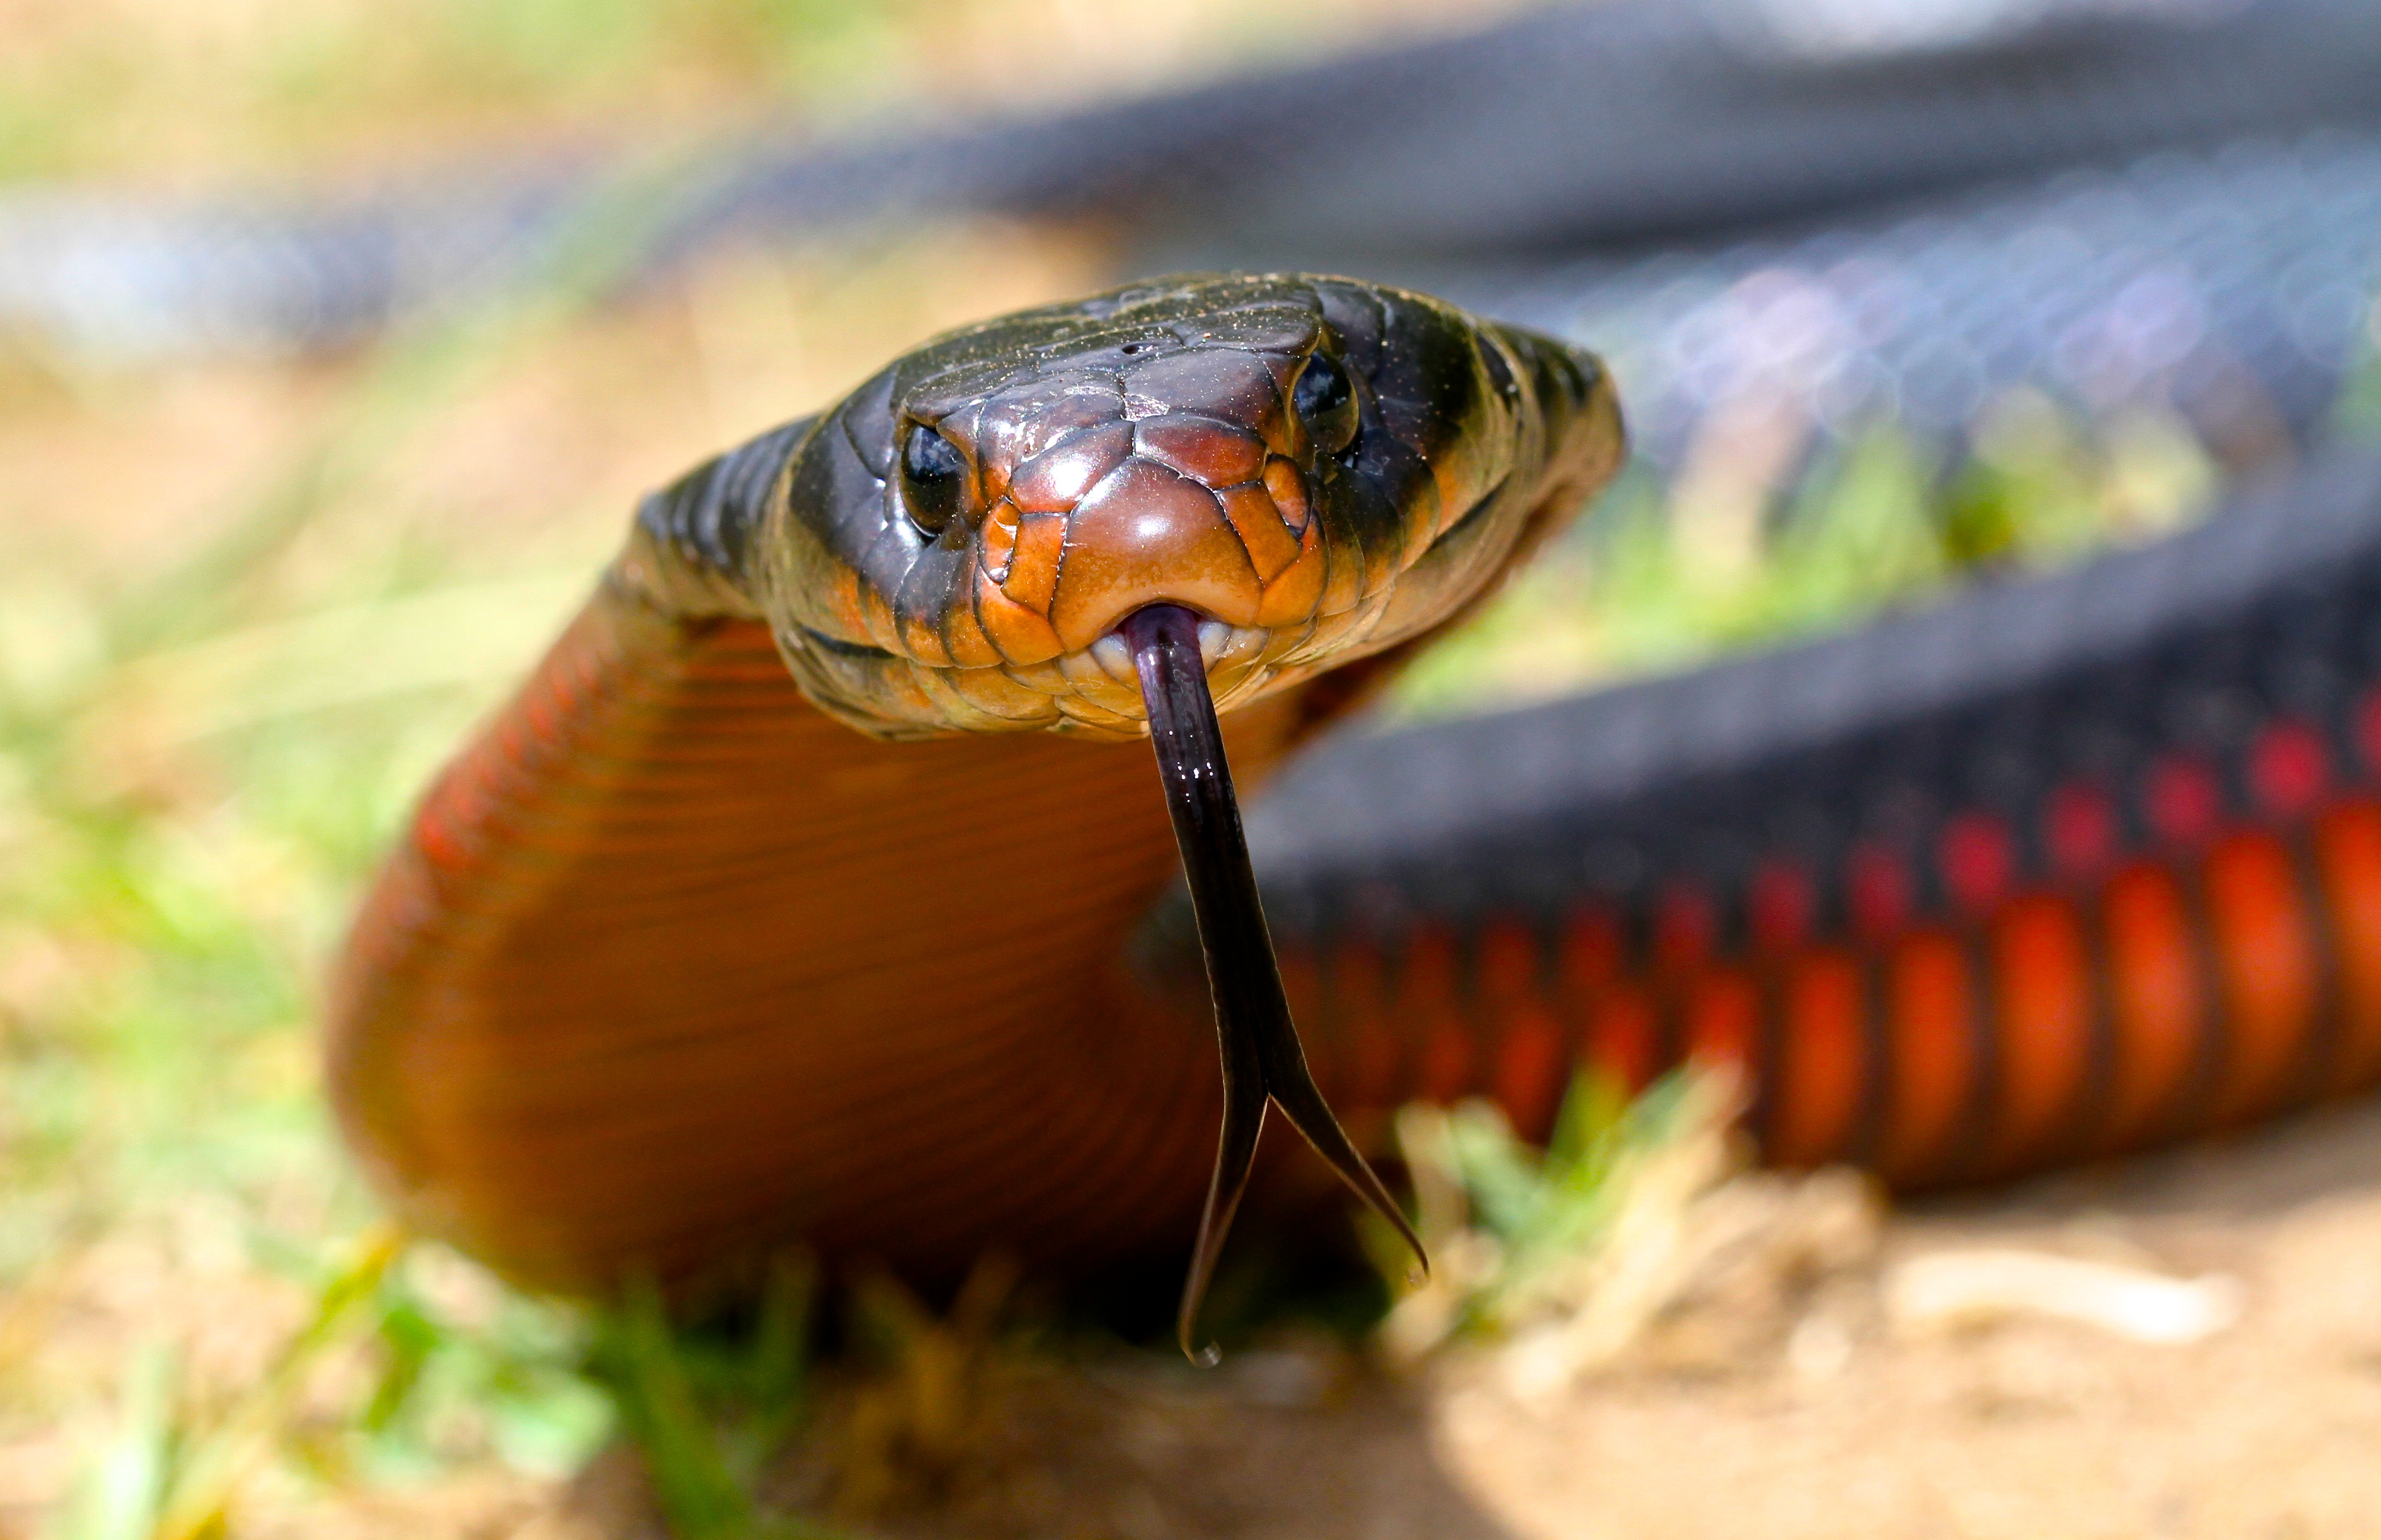 Images of Red-bellied Black Snake | 4482x2899